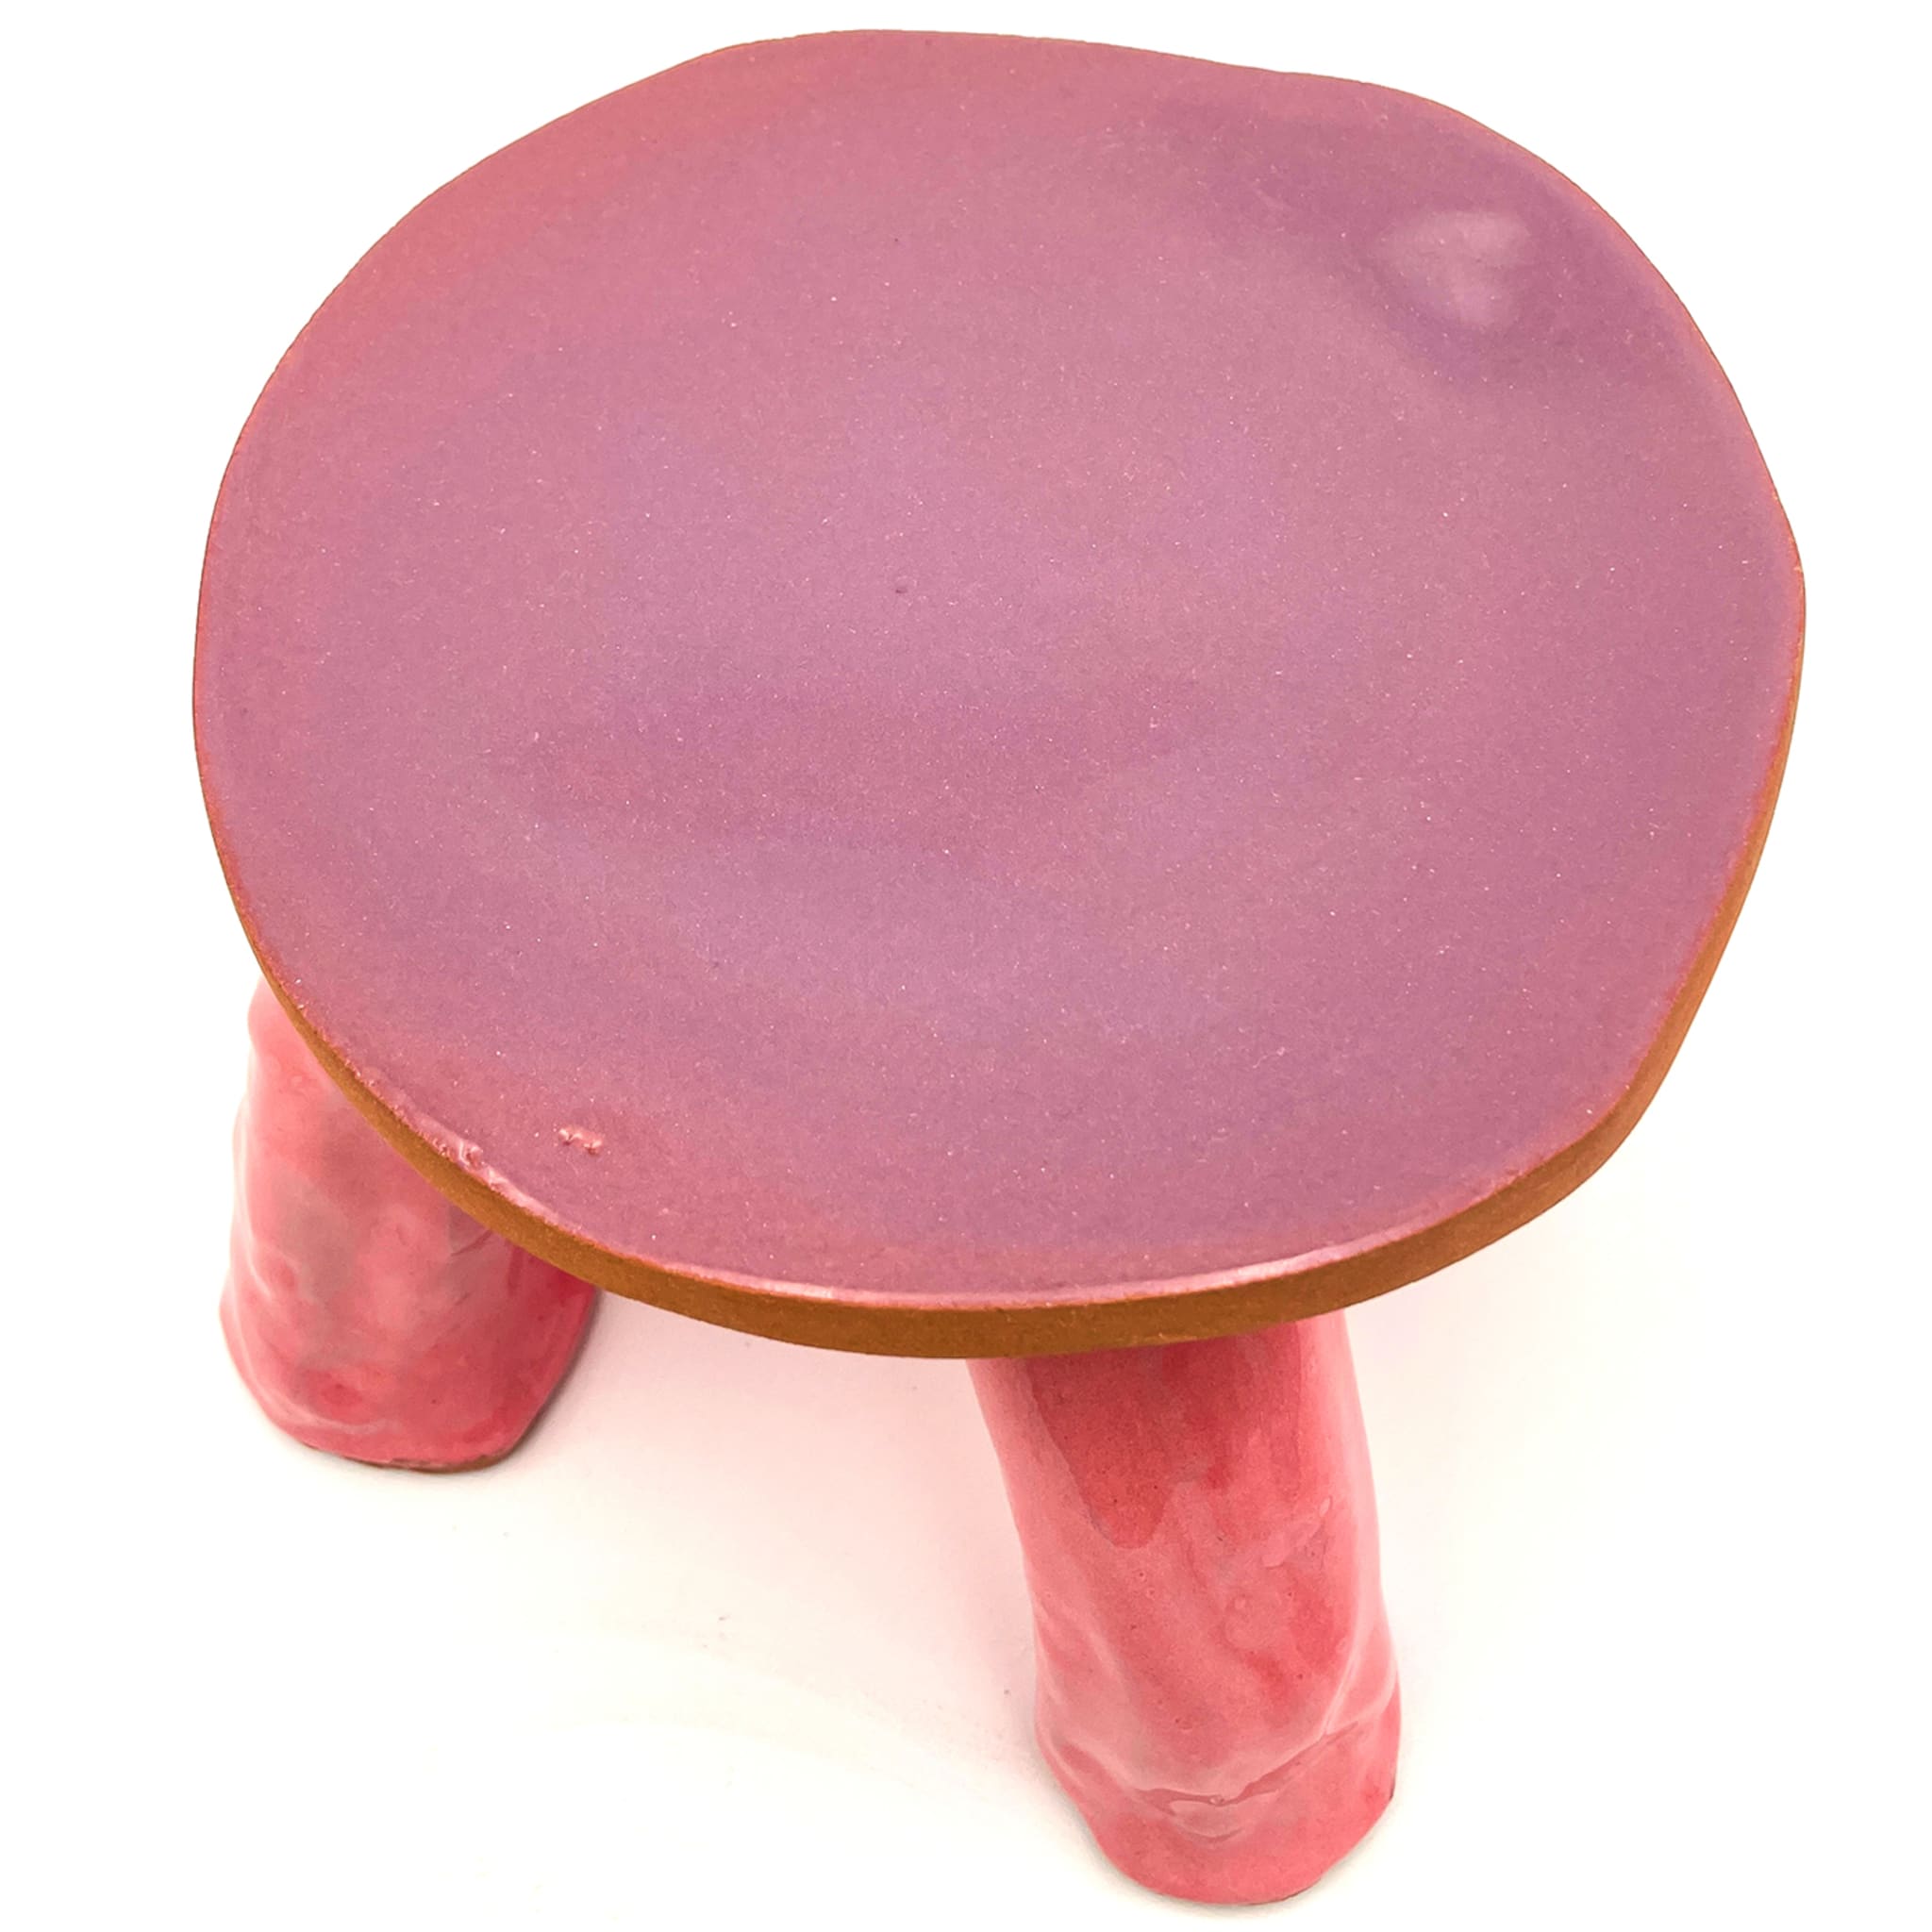 Fungo 4-legged Pink and Lilac Cake Stand - Alternative view 1